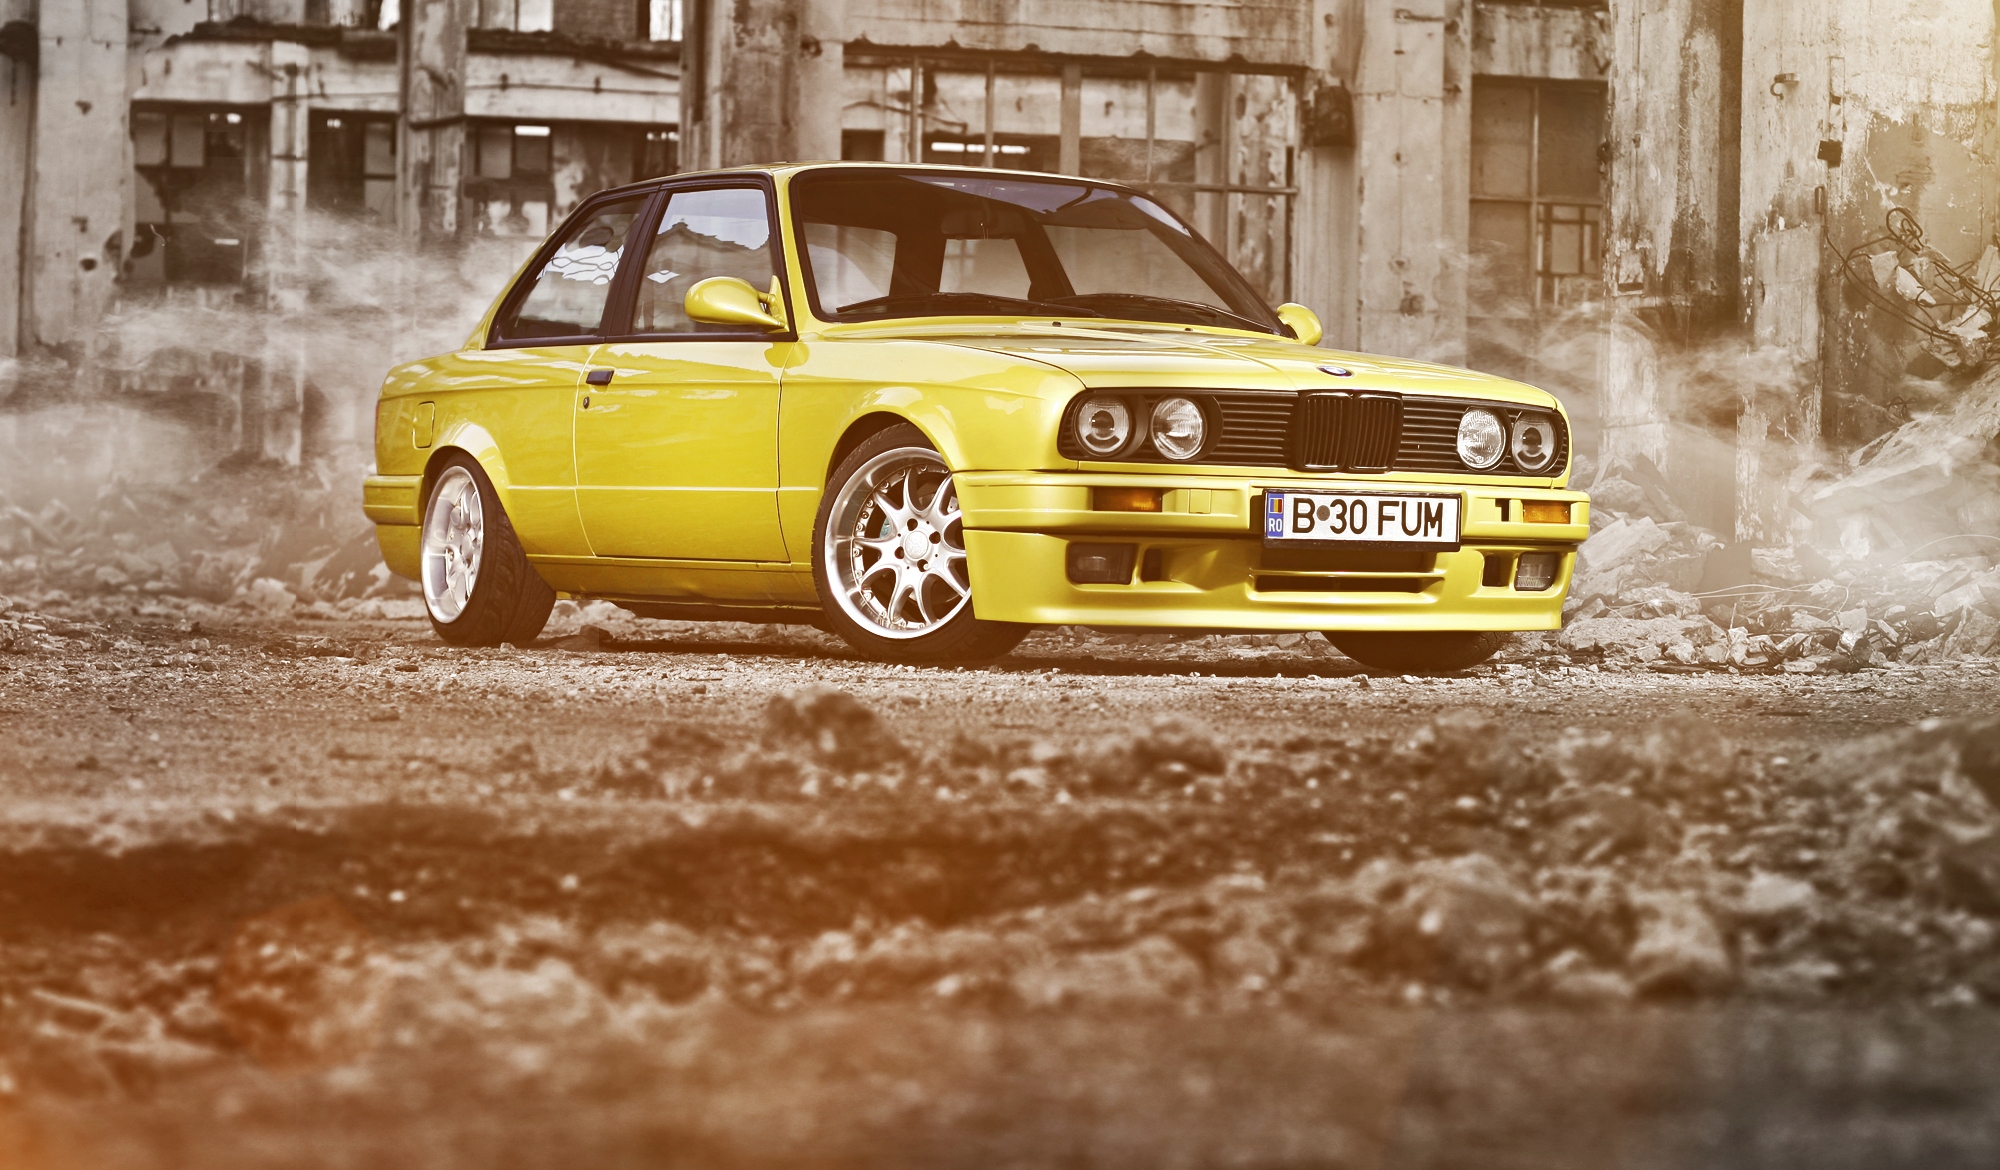 21012 3840x1080 PC pictures for free, download auto, bmw, orange, transport 3840x1080 wallpapers on your desktop